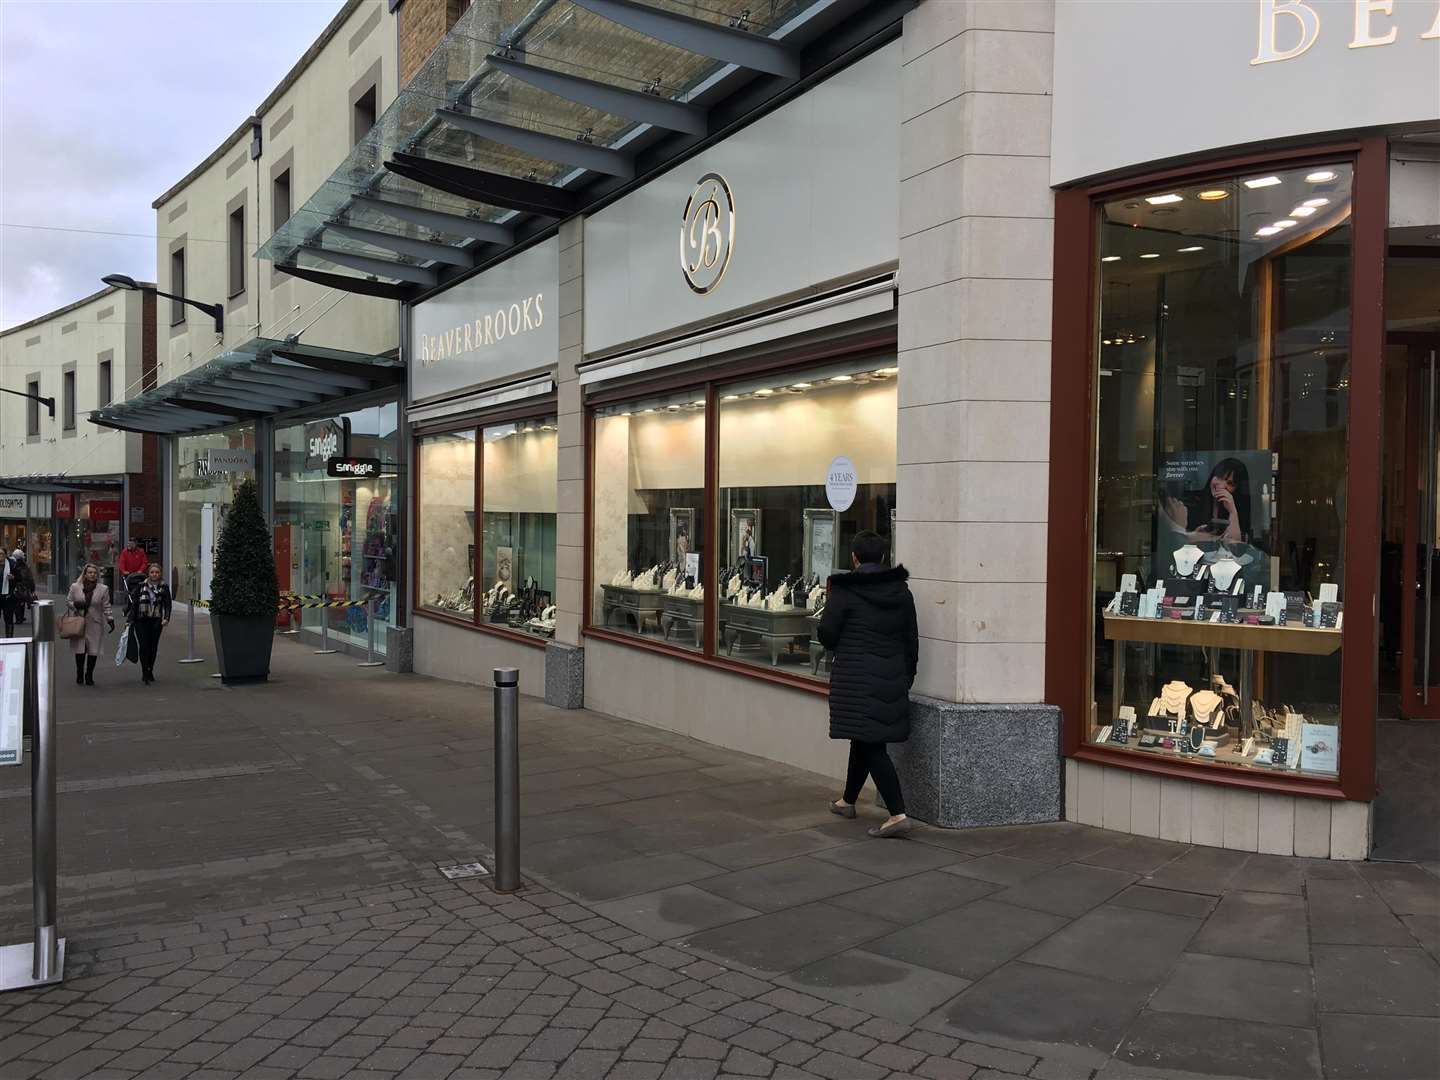 Beaverbrooks in Maidstone has always allowed its employees to have Boxing Day off, in contrast to many other retailers. (5571740)